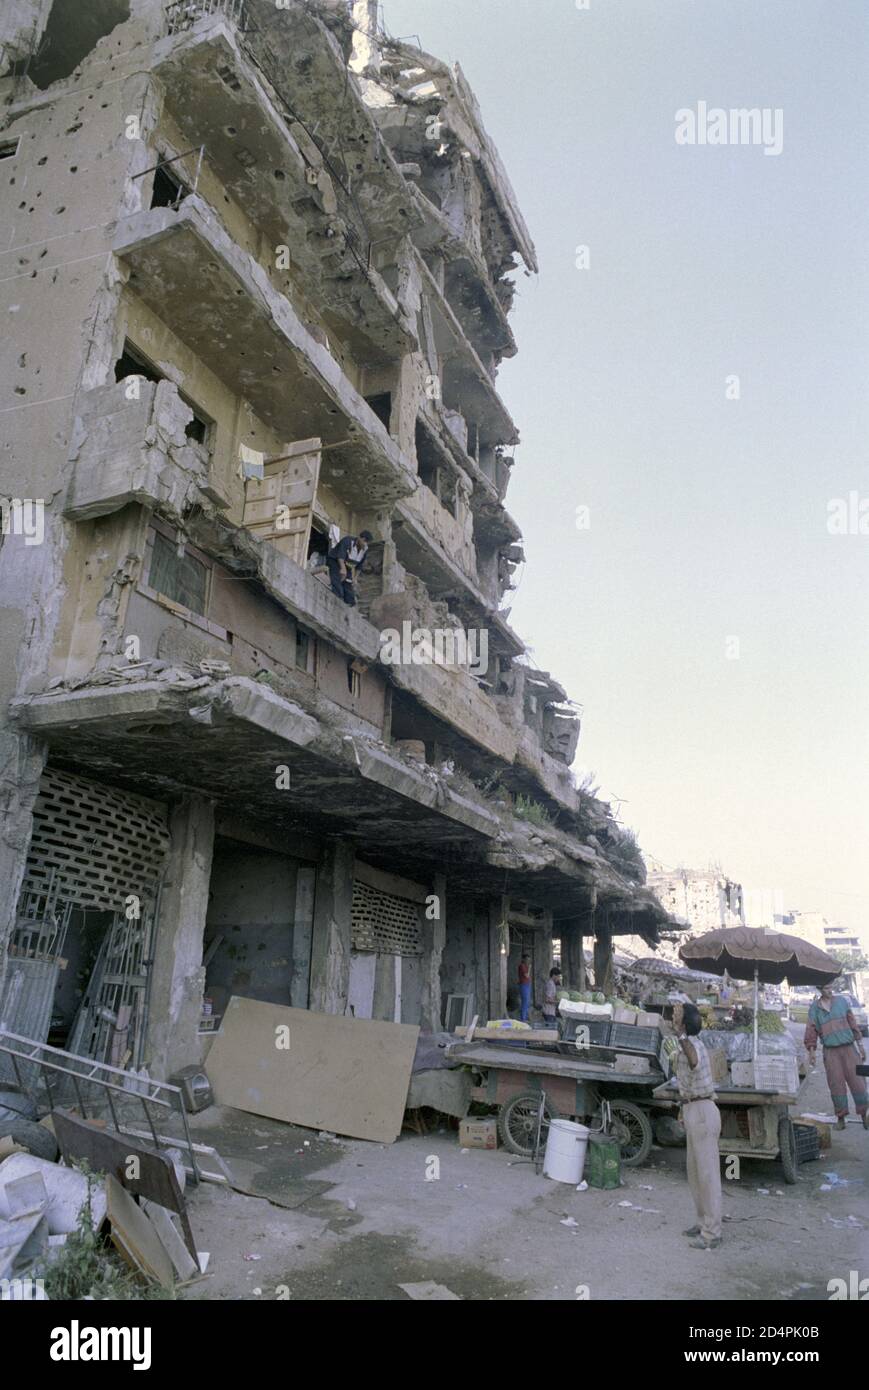 18th September 1993 After 15 years of civil war, life goes on in a battle-scarred building on Michel Zakhour street, Beirut. Stock Photo